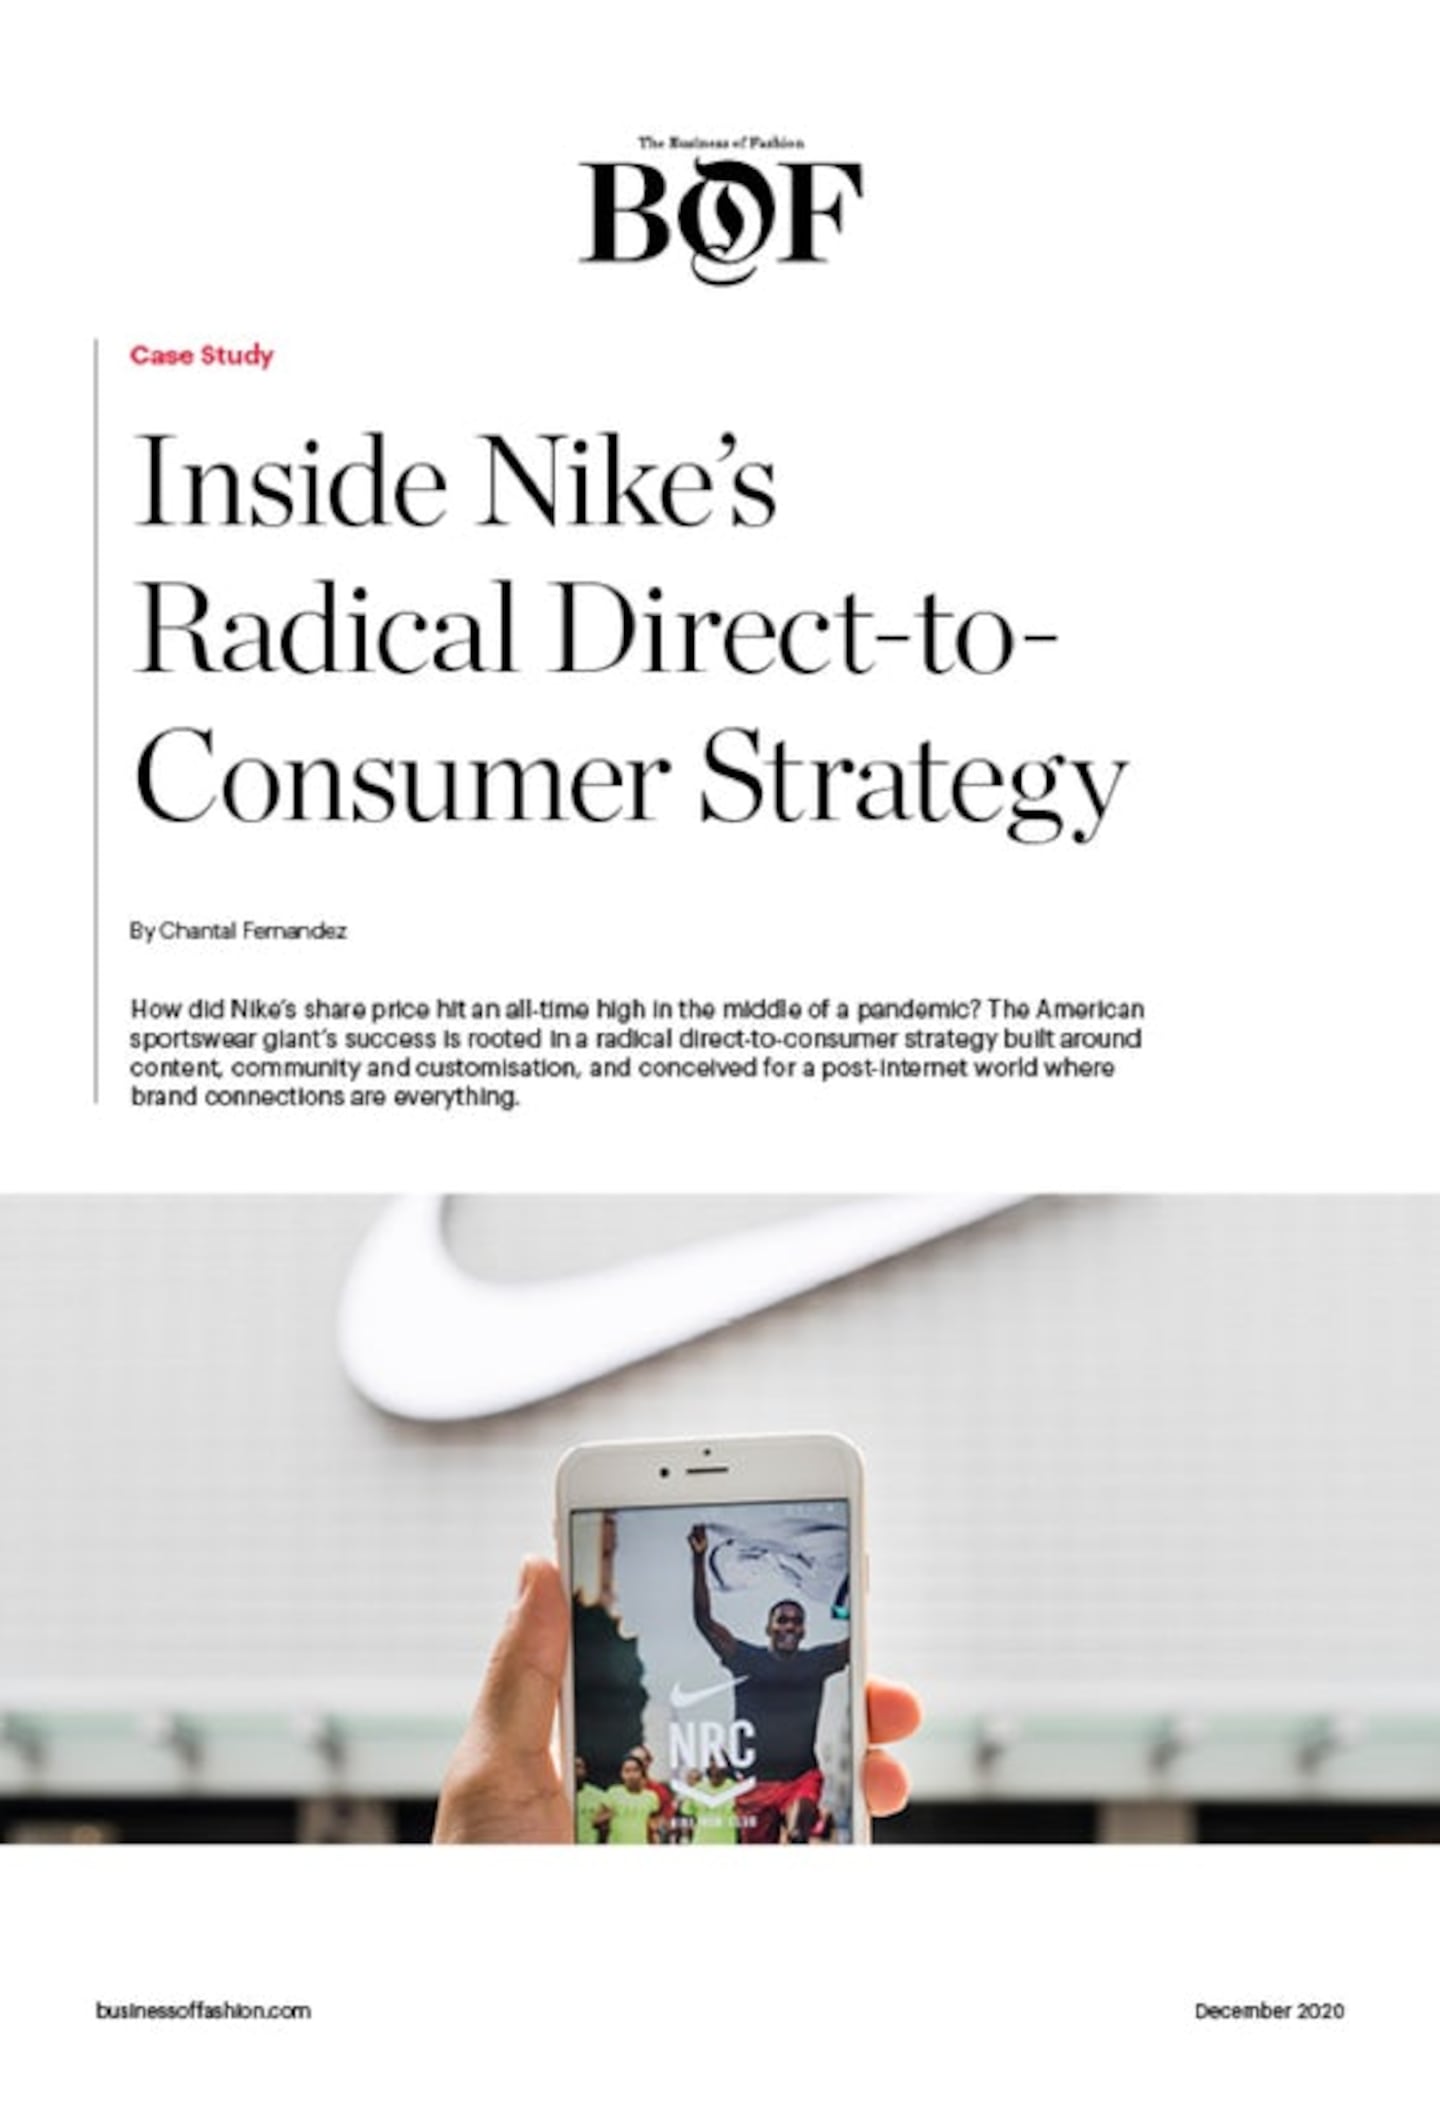 Inside Nike's Radical Direct-to-Consumer Strategy Case Study